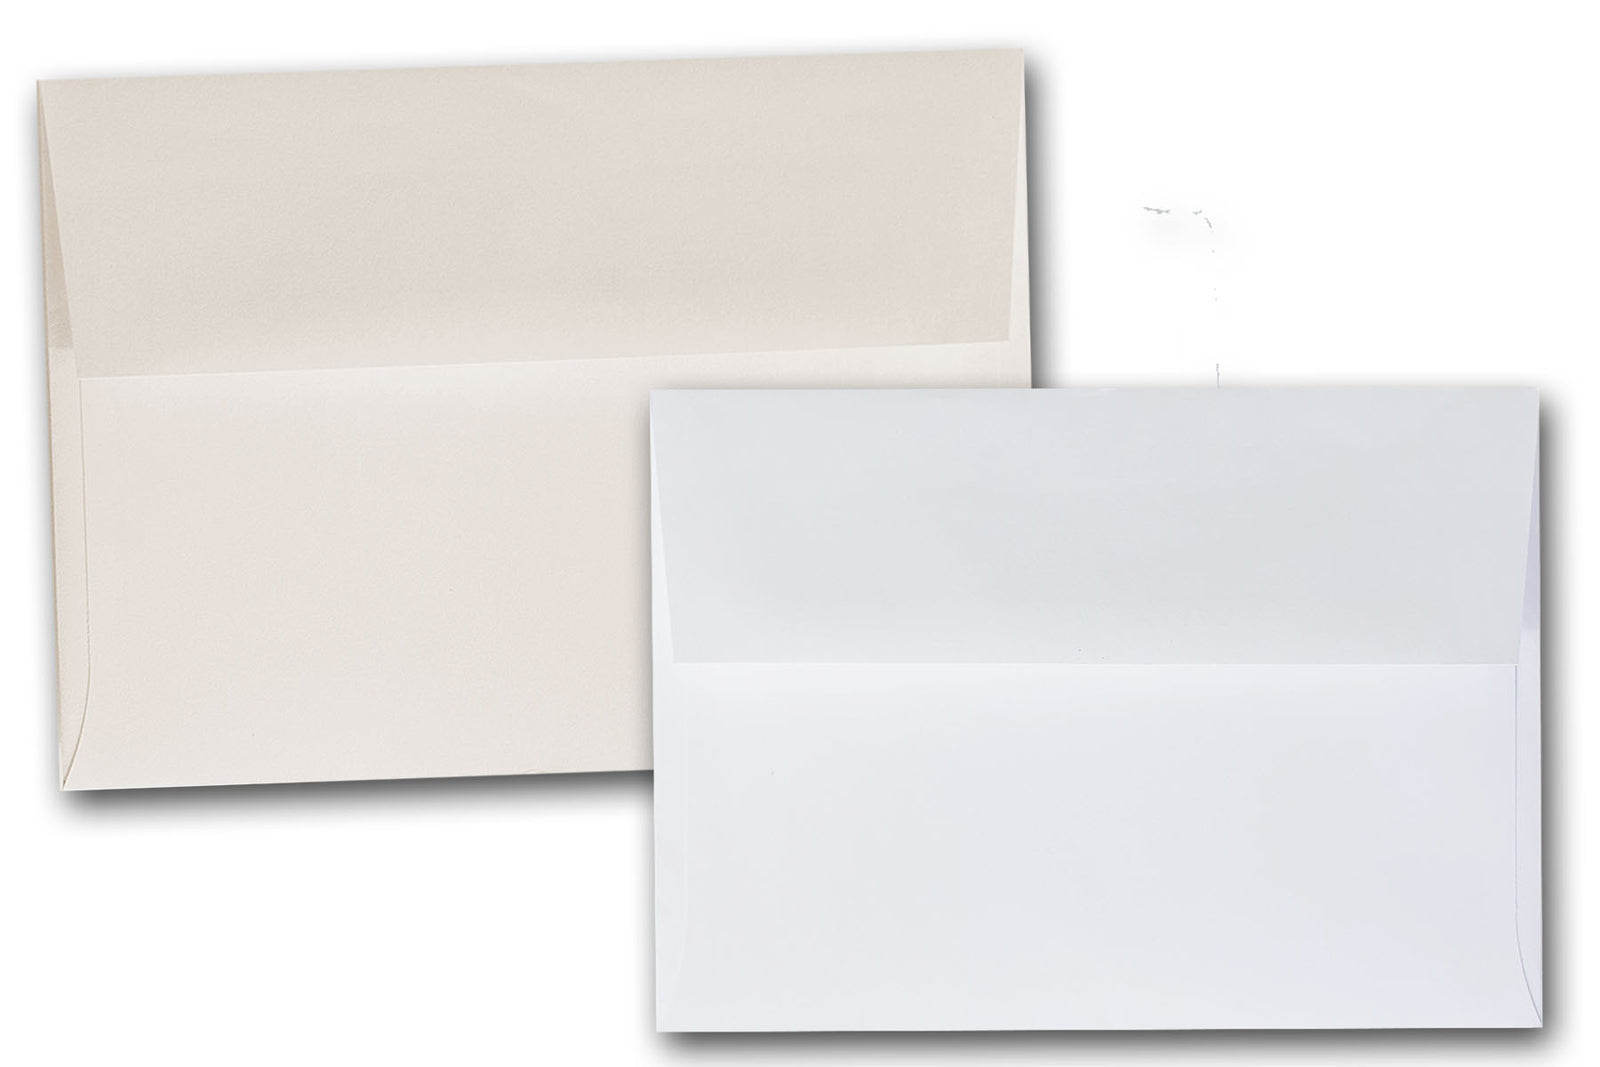 Wedding White Soft White Wedding Envelopes 25 Blank printing Available A6,  A7, A9 More Popular Invitation Sizes Thick Paper 